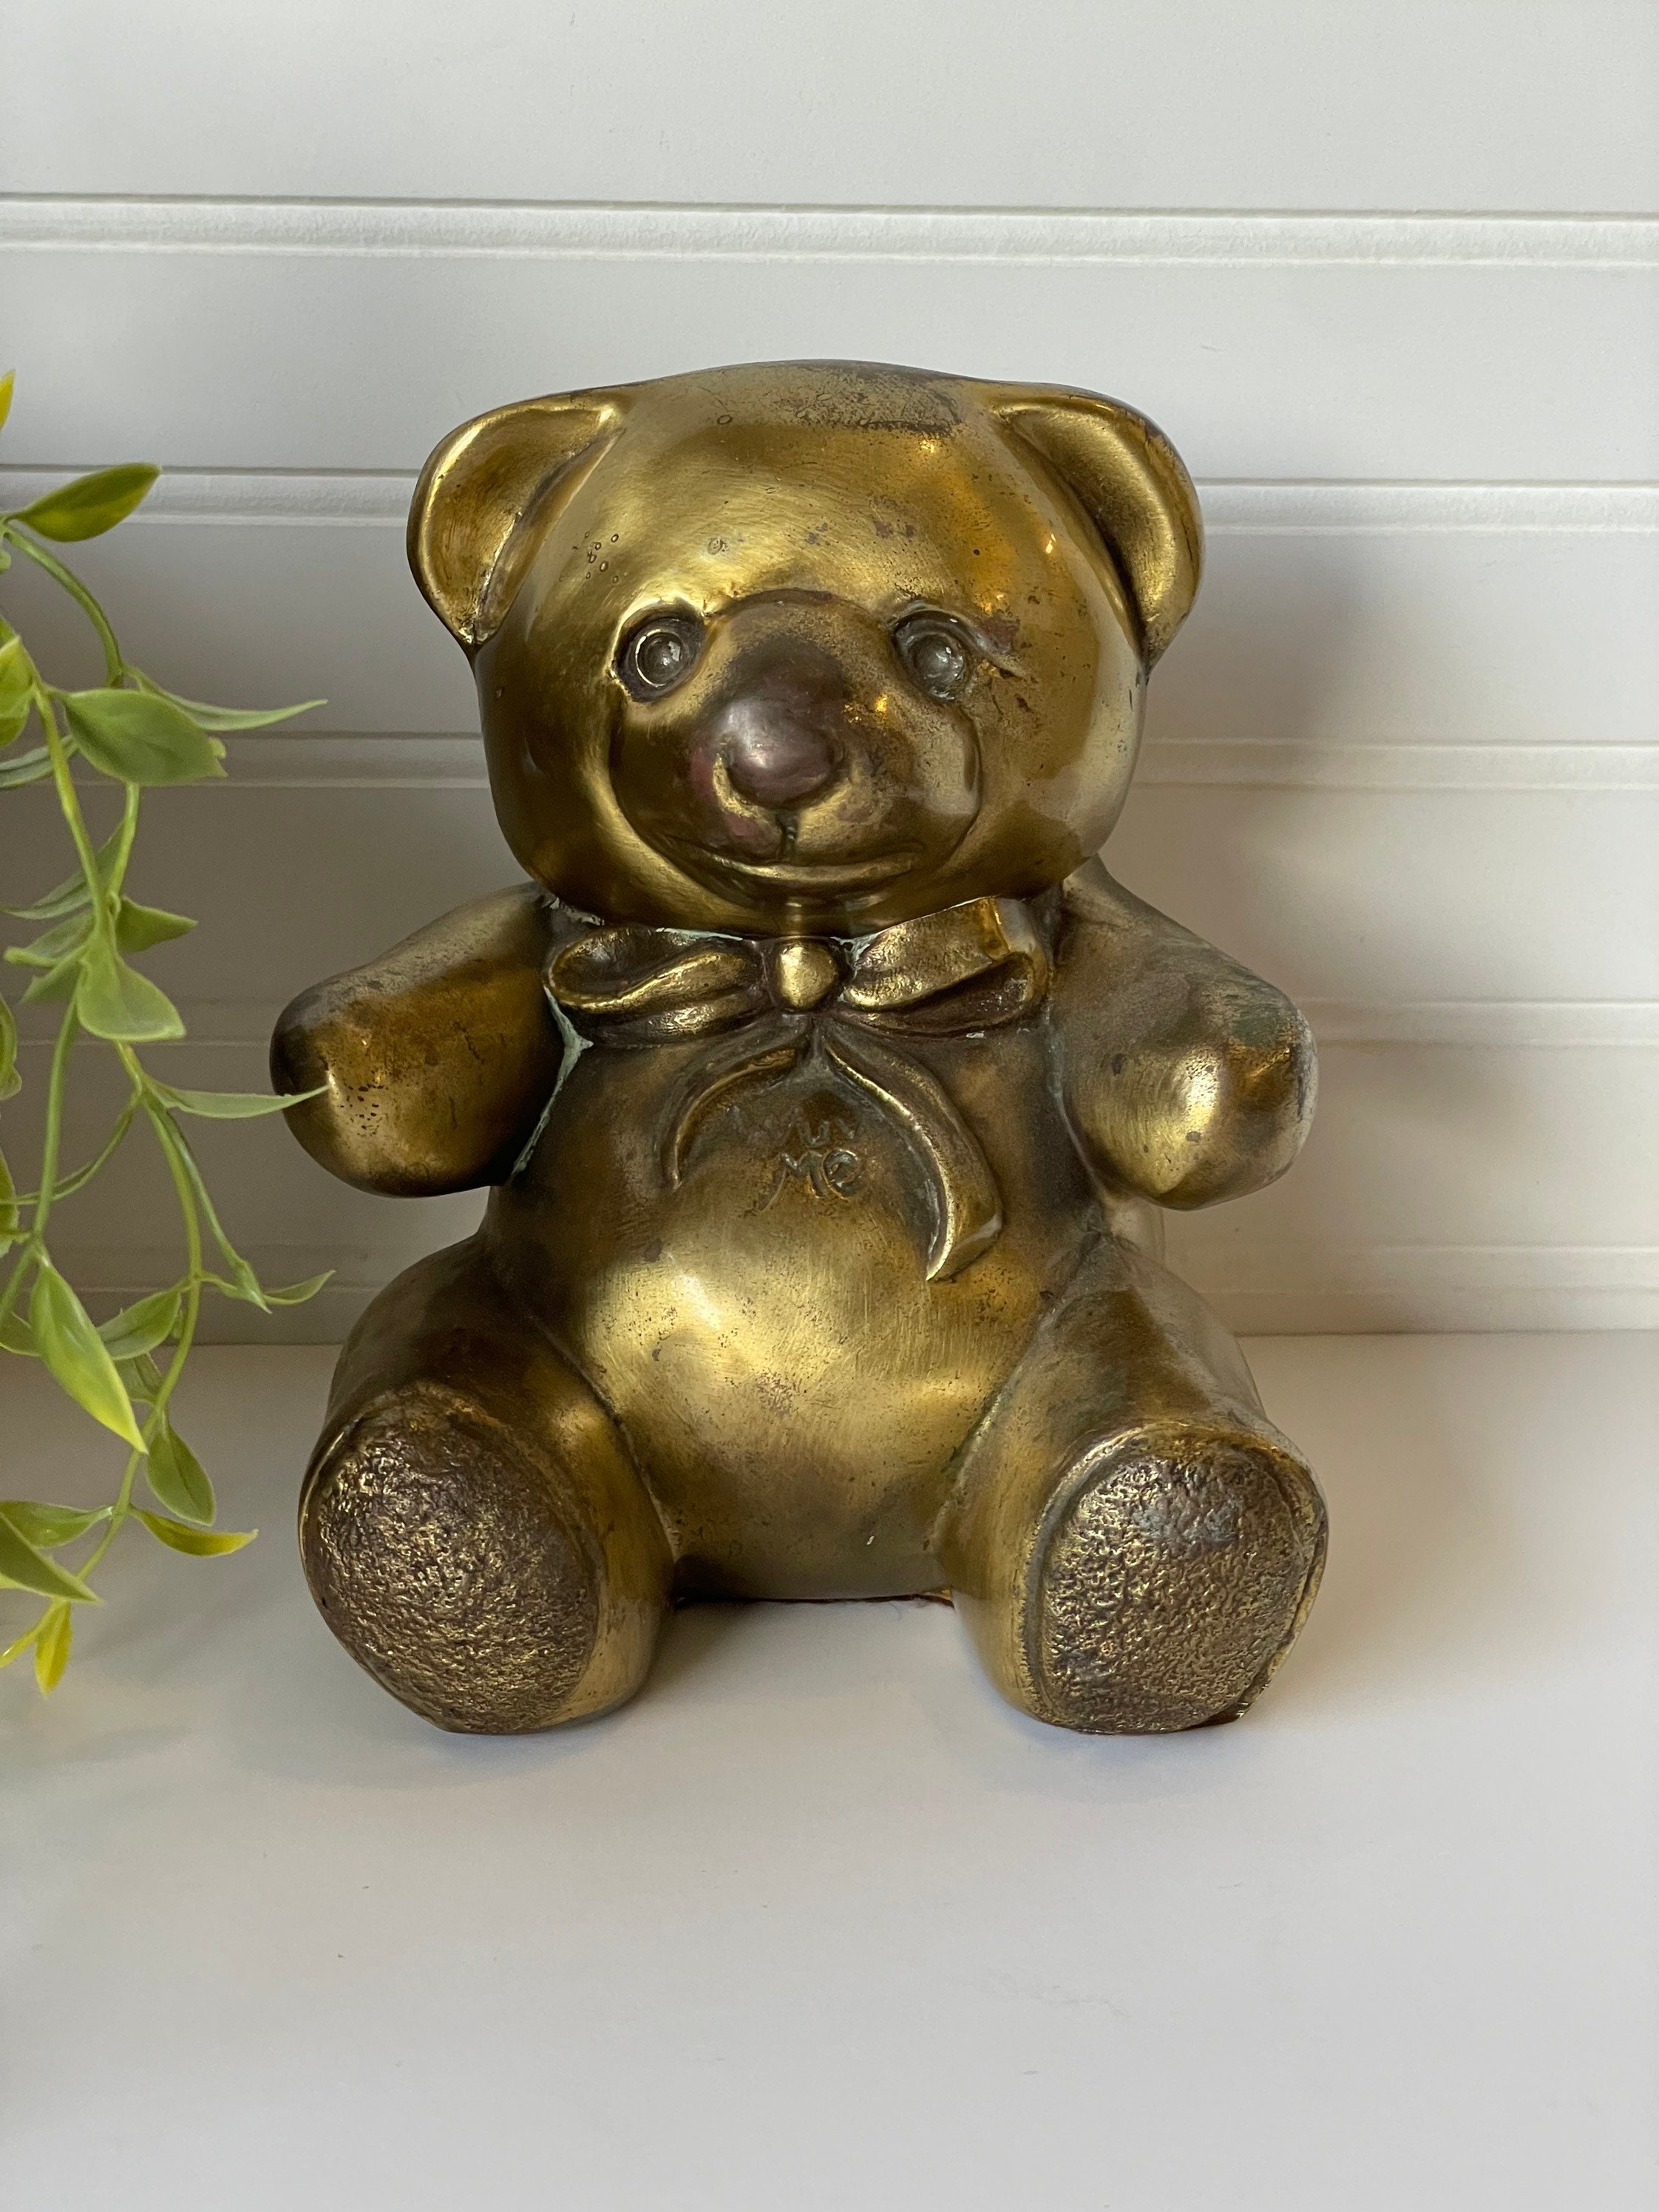 Small Vintage Brass Teddy Bear Figurine, Library Study Decor, Cottage Chic,  Bedroom Shelf Accent